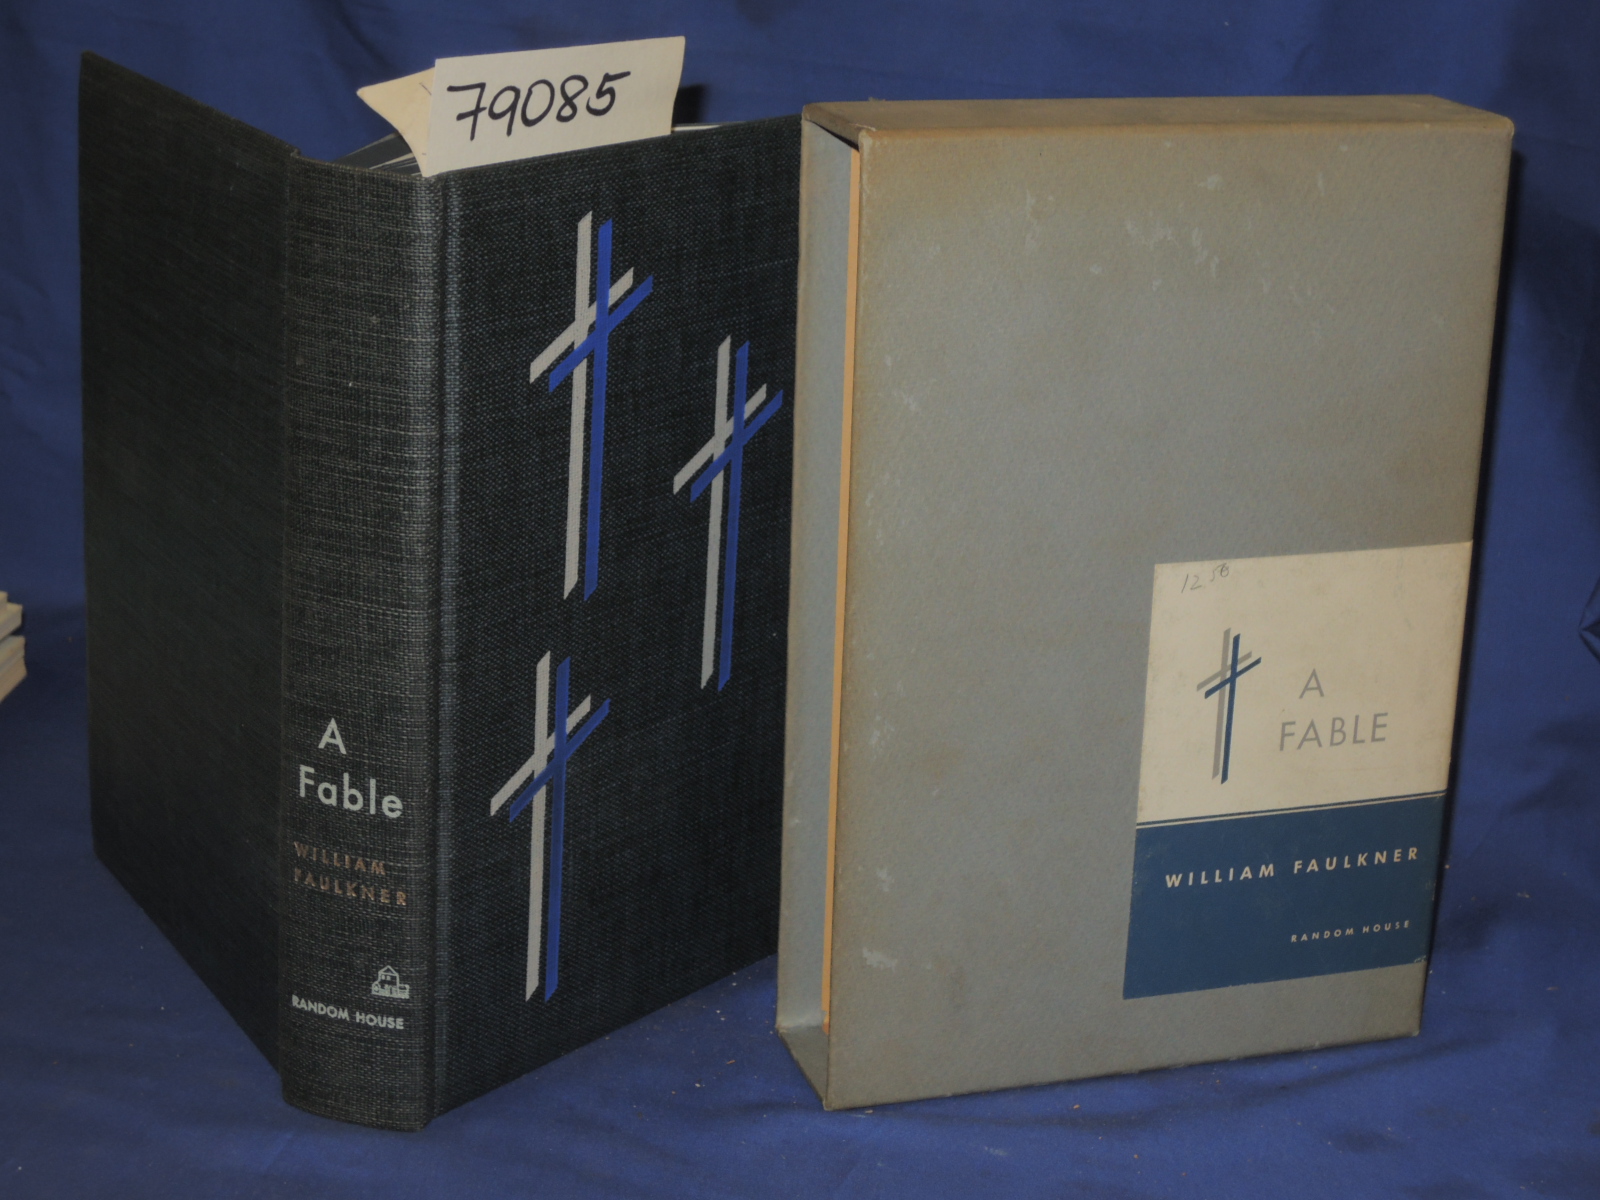 Faulkner, William: A FABLE SIGNED by William Faulkner